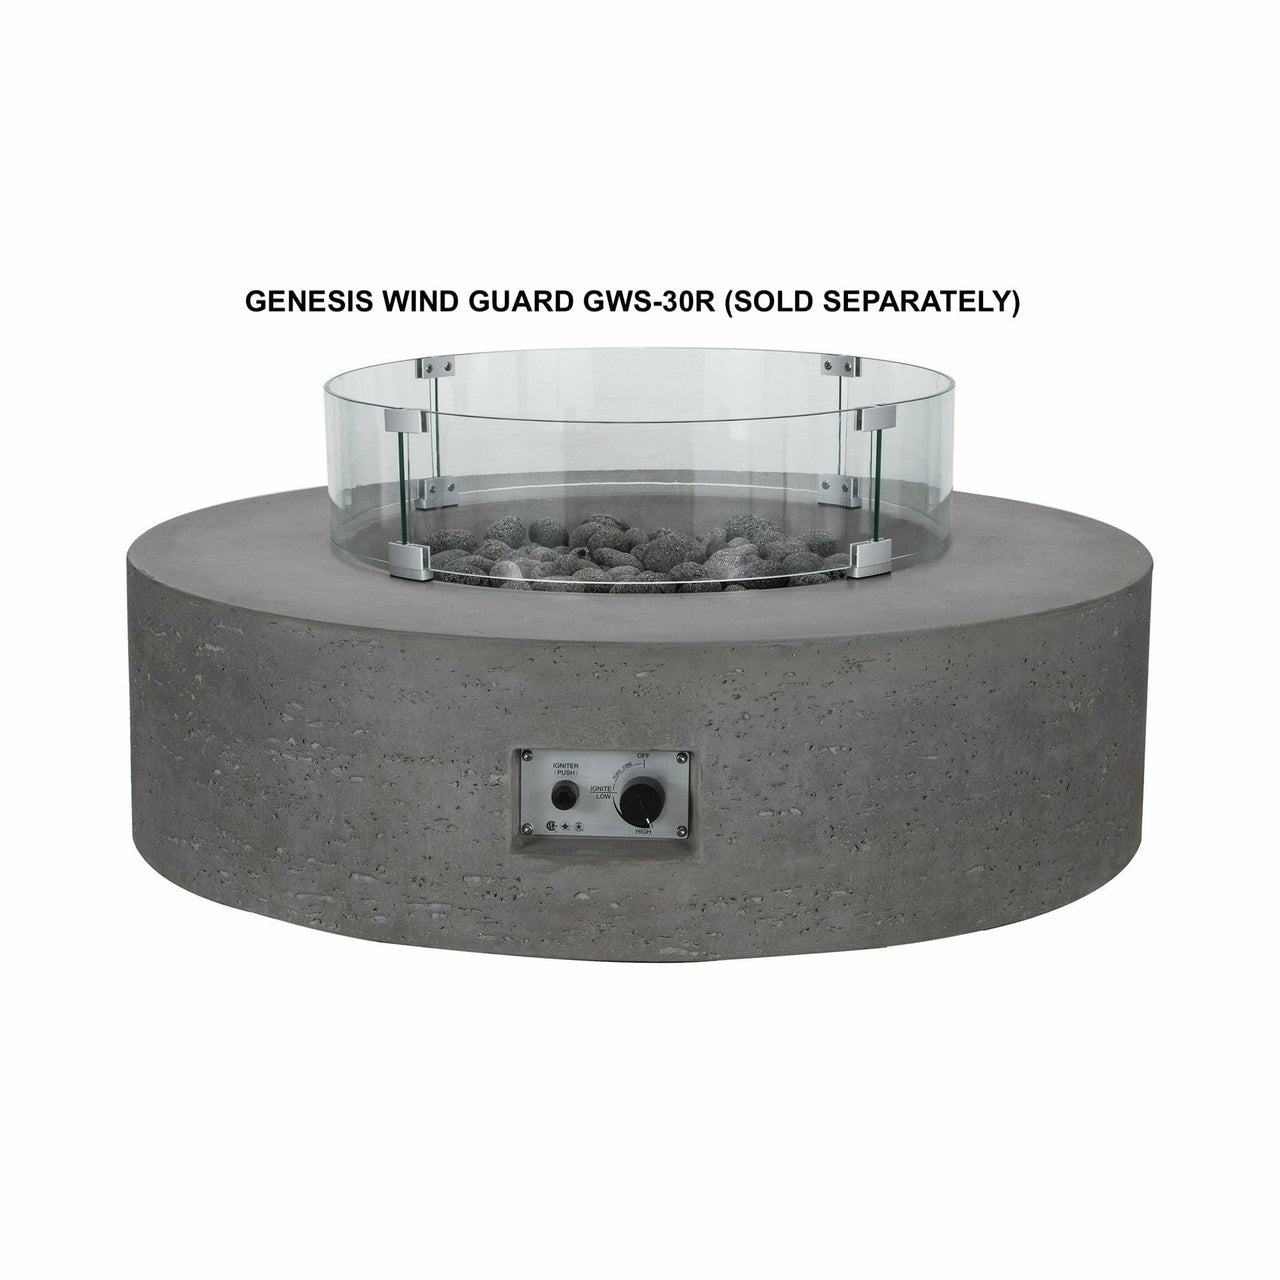 PyroMania Fire - Wind Guard for Shangri-La and Genesis Fire Tables - Fire Pit Stock